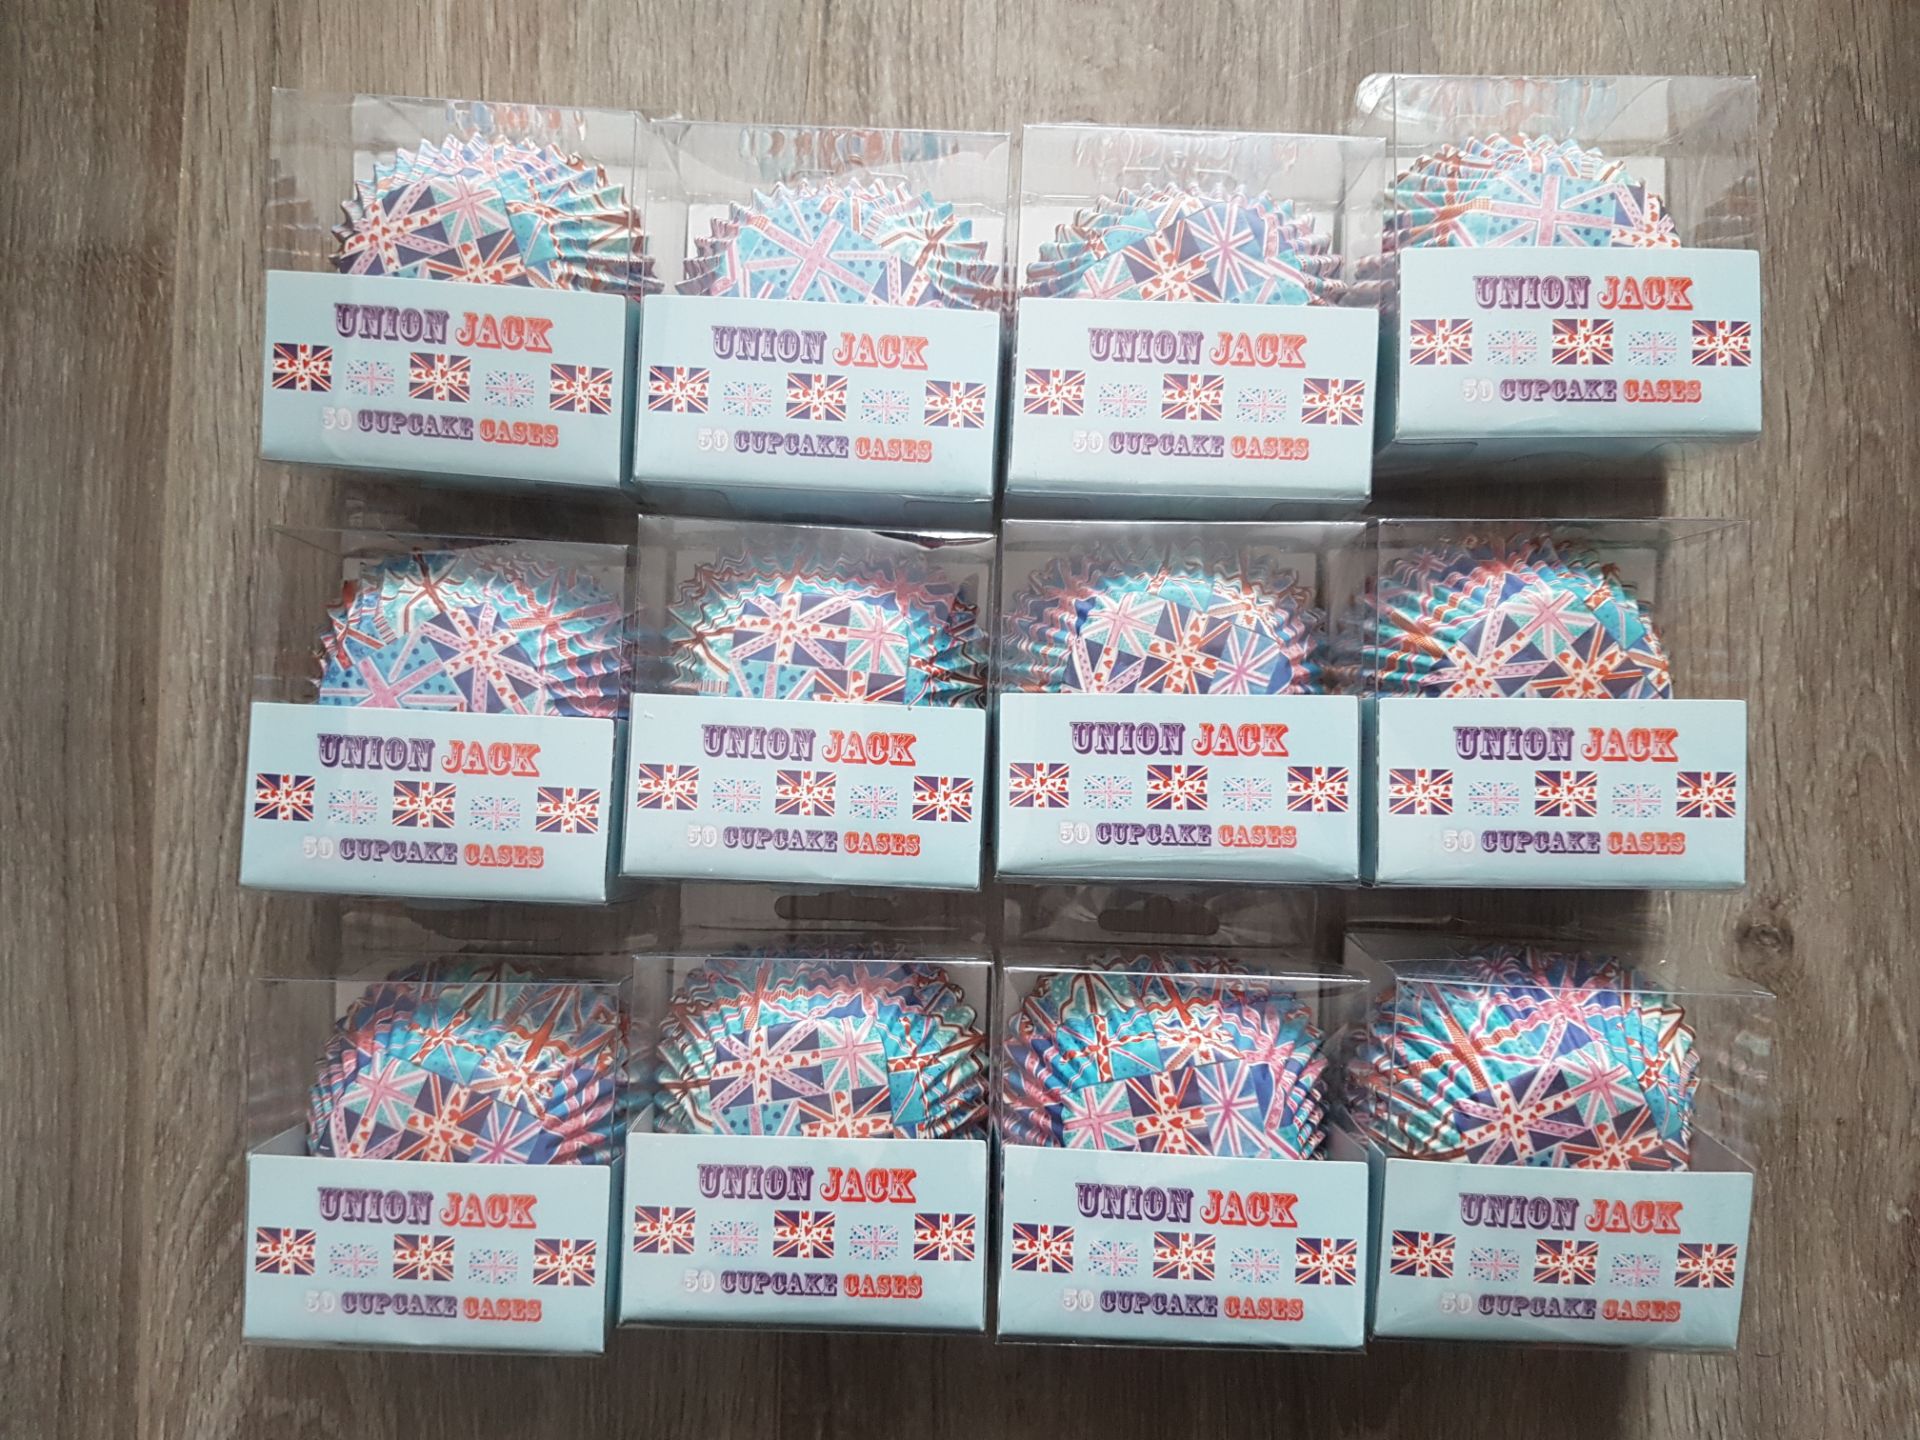 600 Brand new Packaged Union Jack Cupcake cases